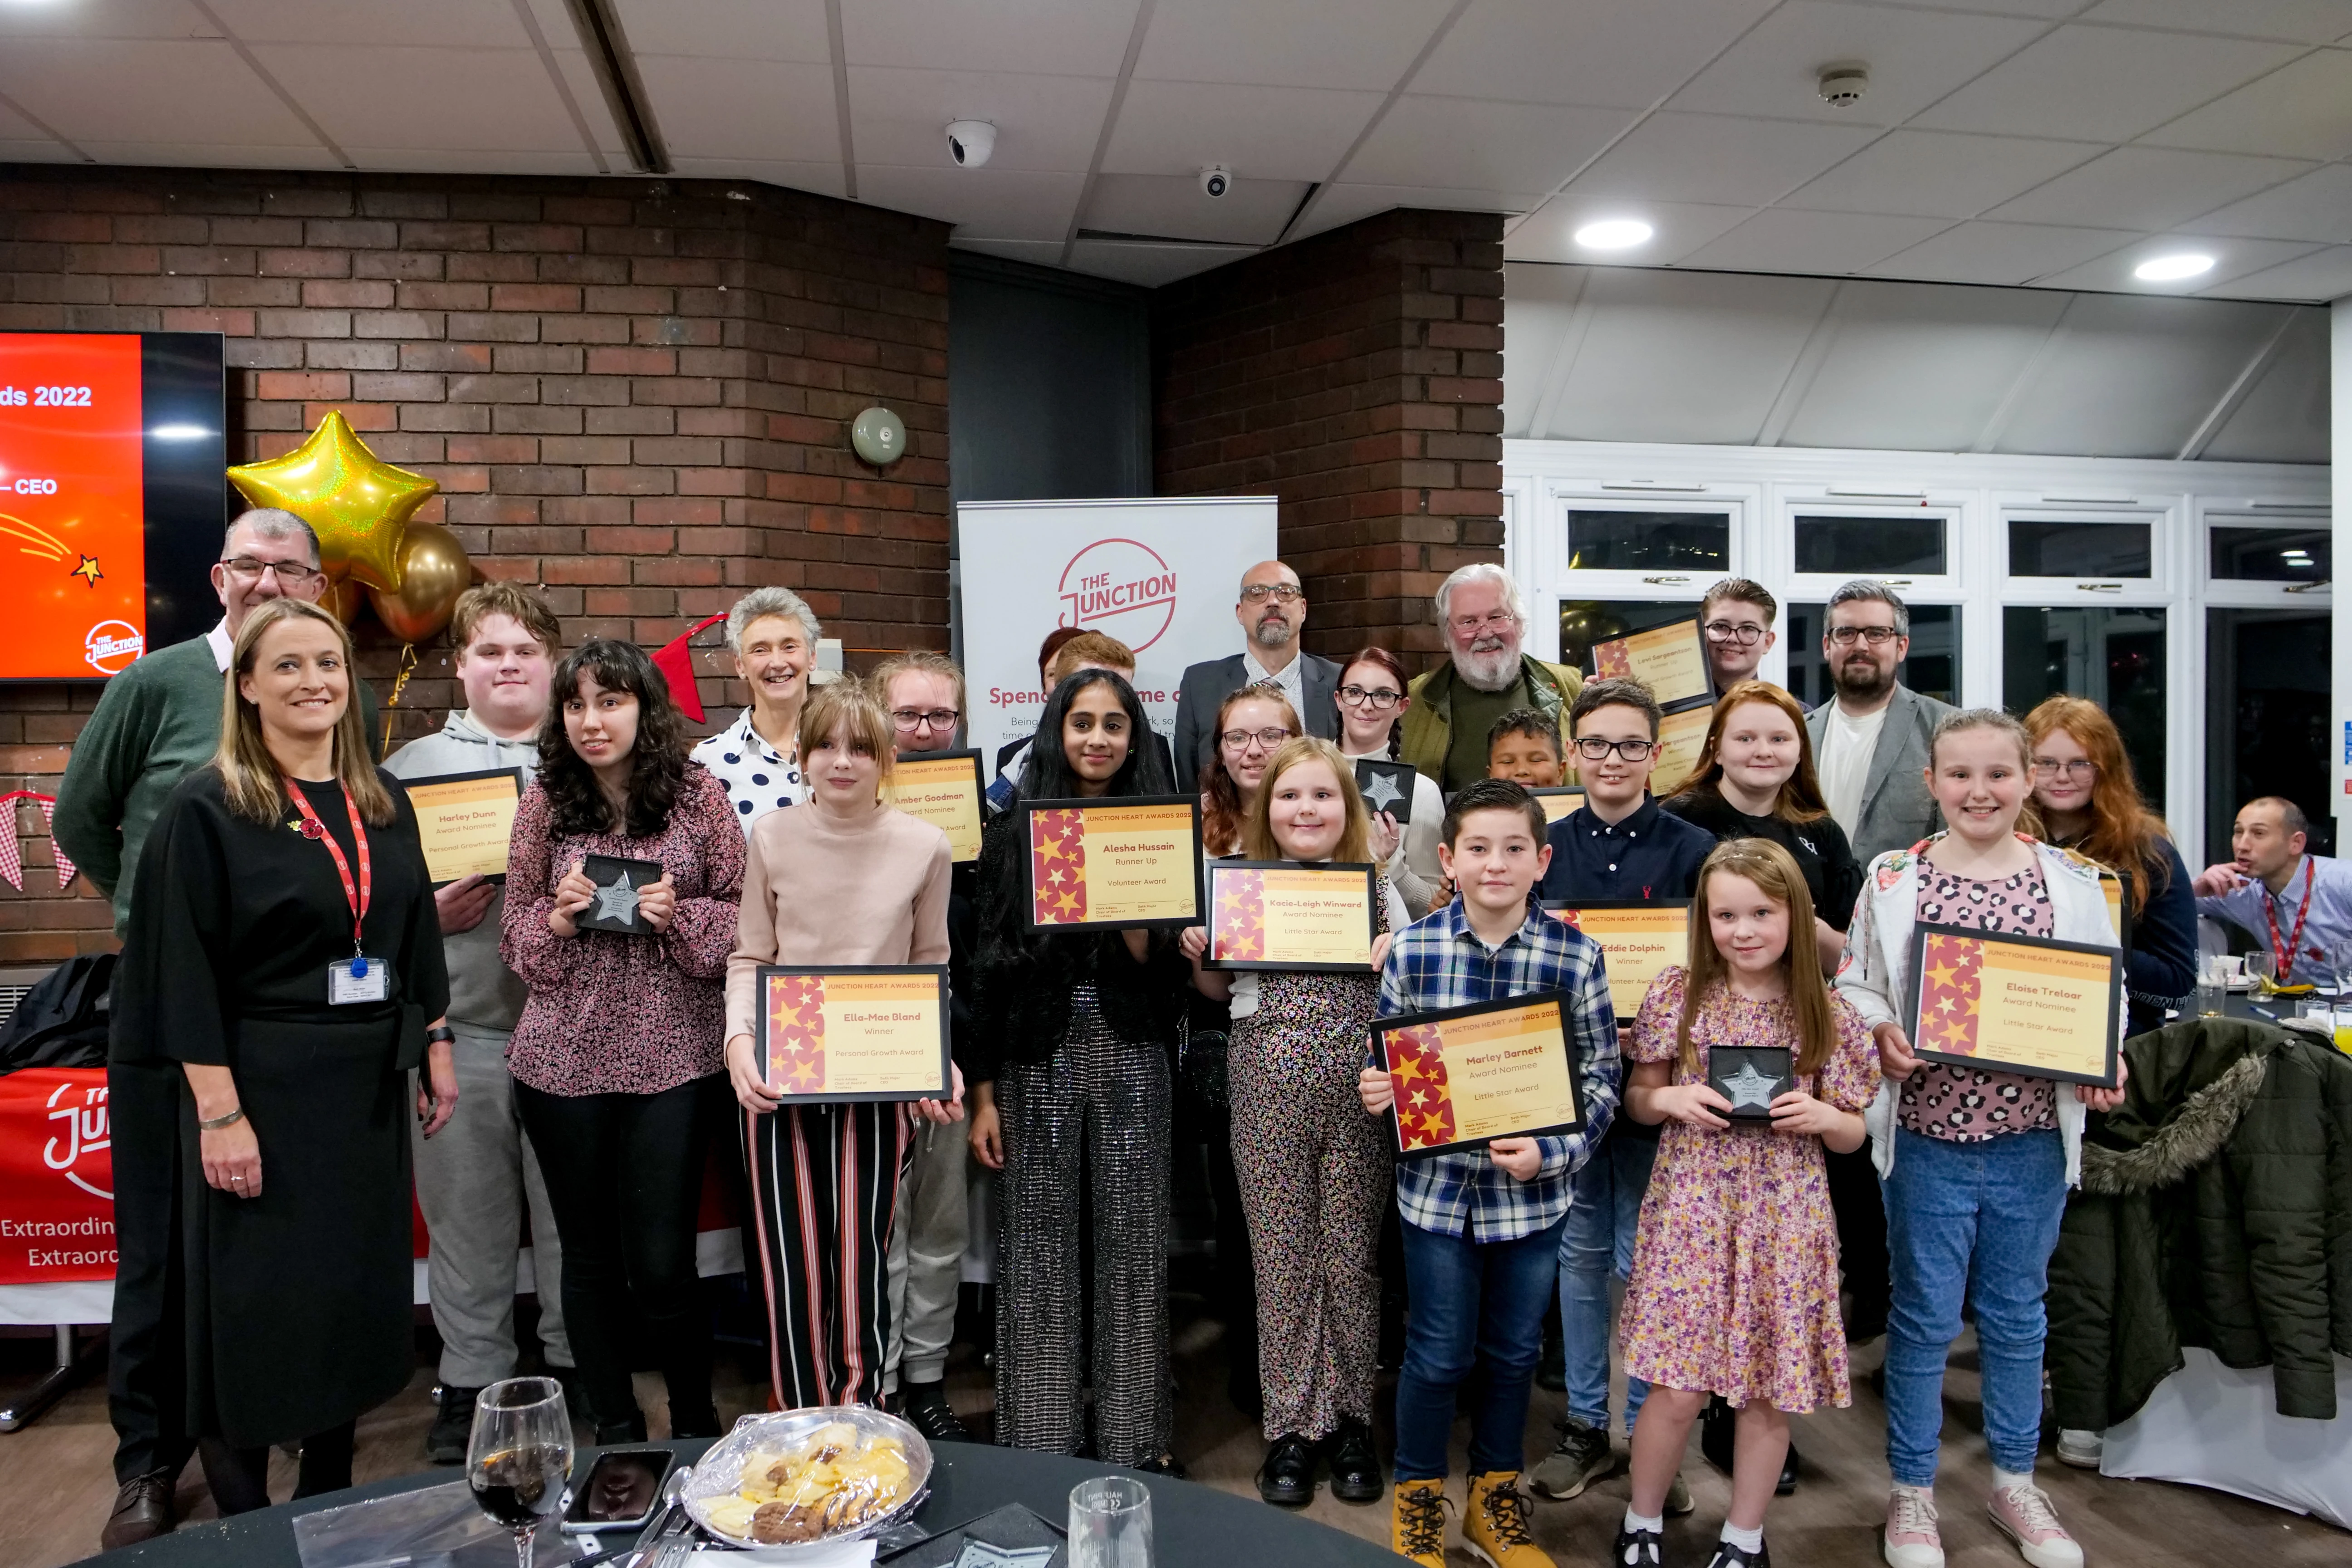 Award winners, sponsors and Junction staff